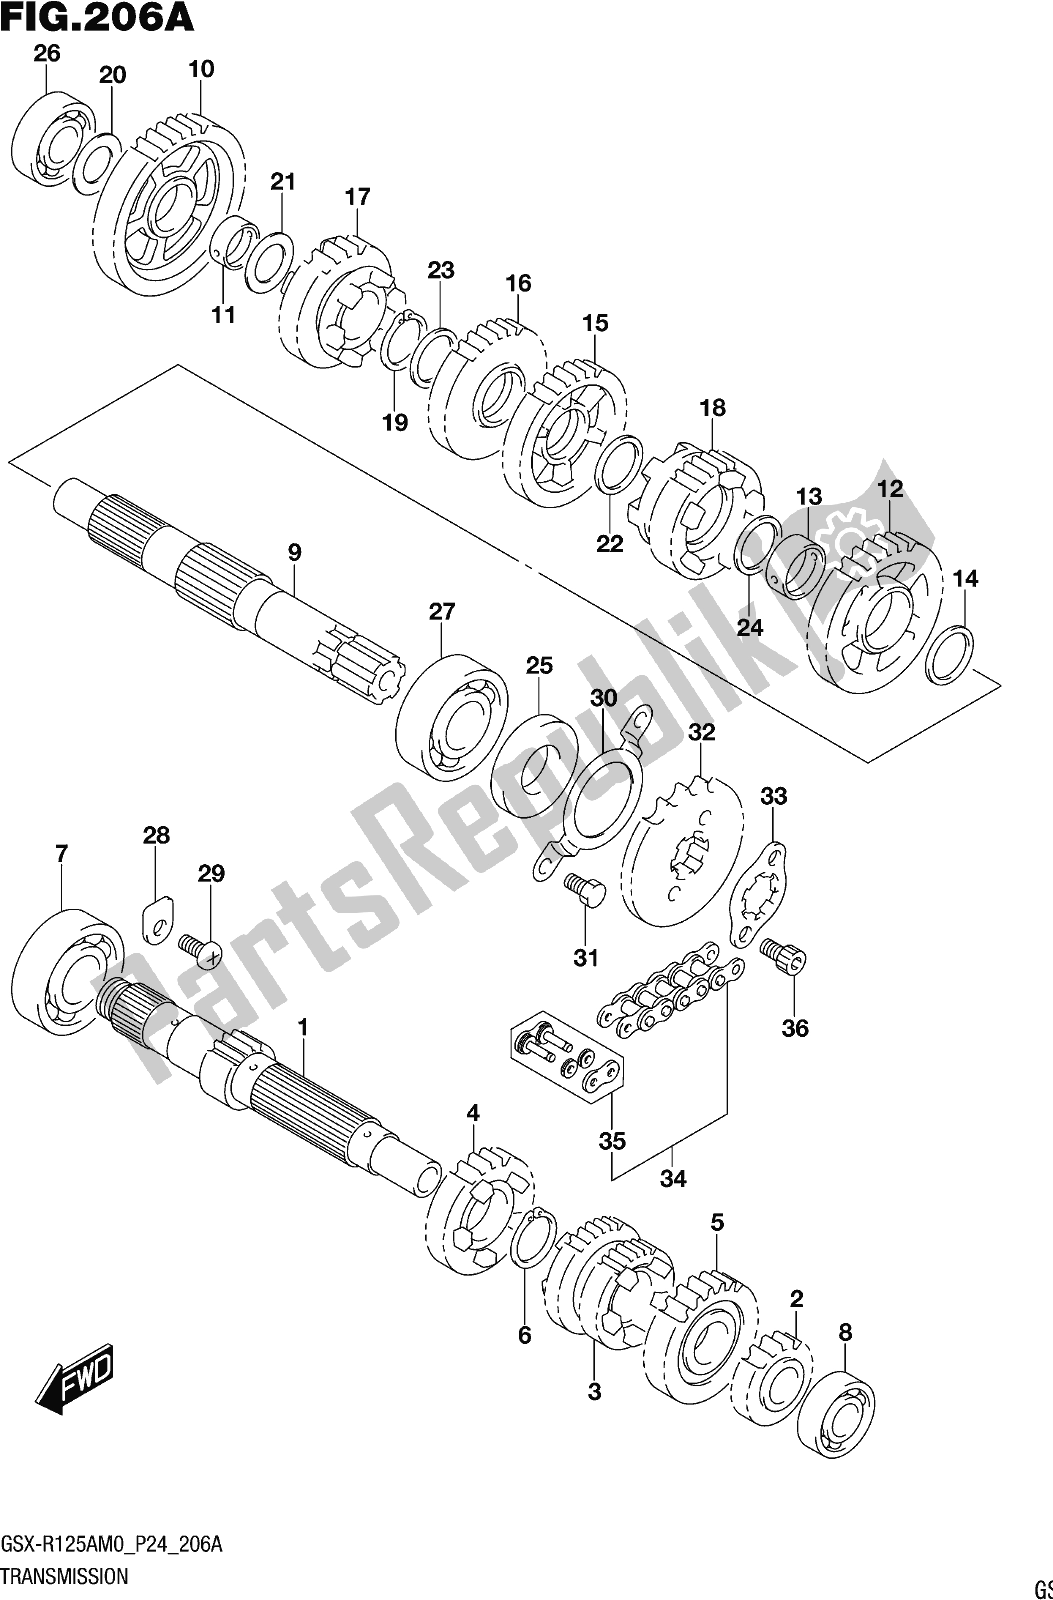 All parts for the Fig. 206a Transmission of the Suzuki Gsx-r 125A 2020